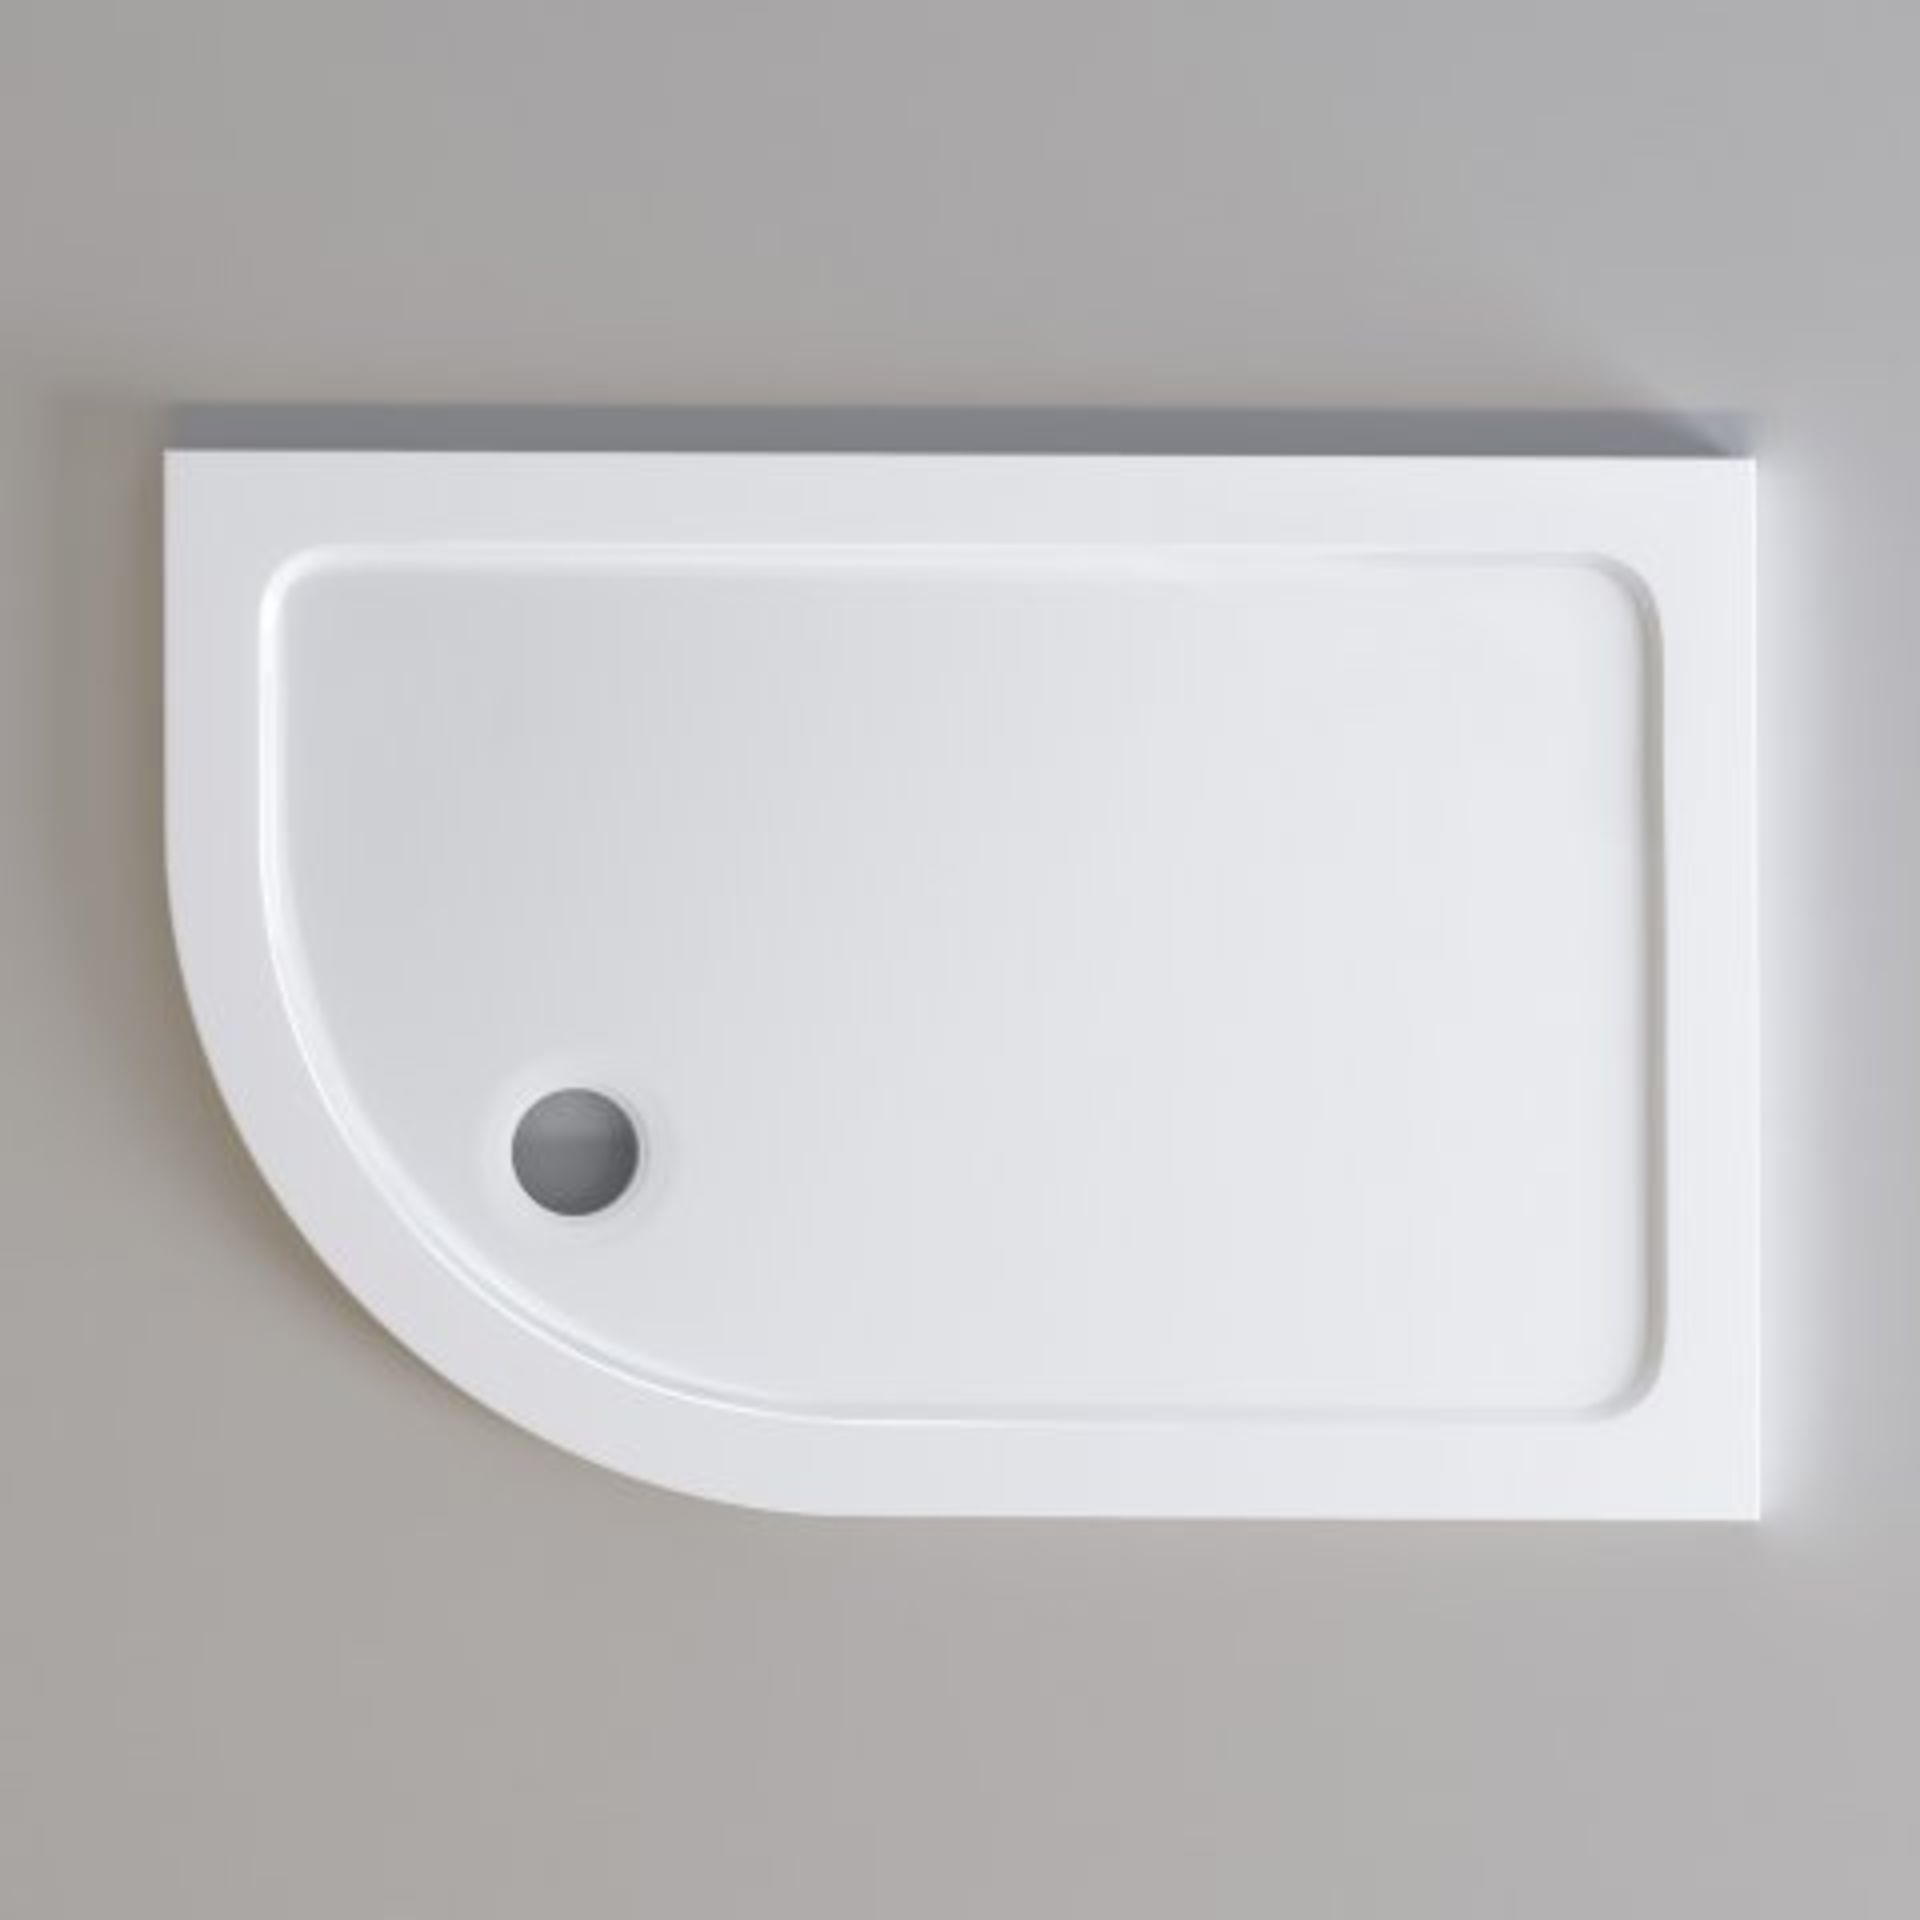 (T205) 1200x800mm Offset Quadrant Ultraslim Stone Shower Tray - Left. RRP £299.99. Magnificently - Image 2 of 2